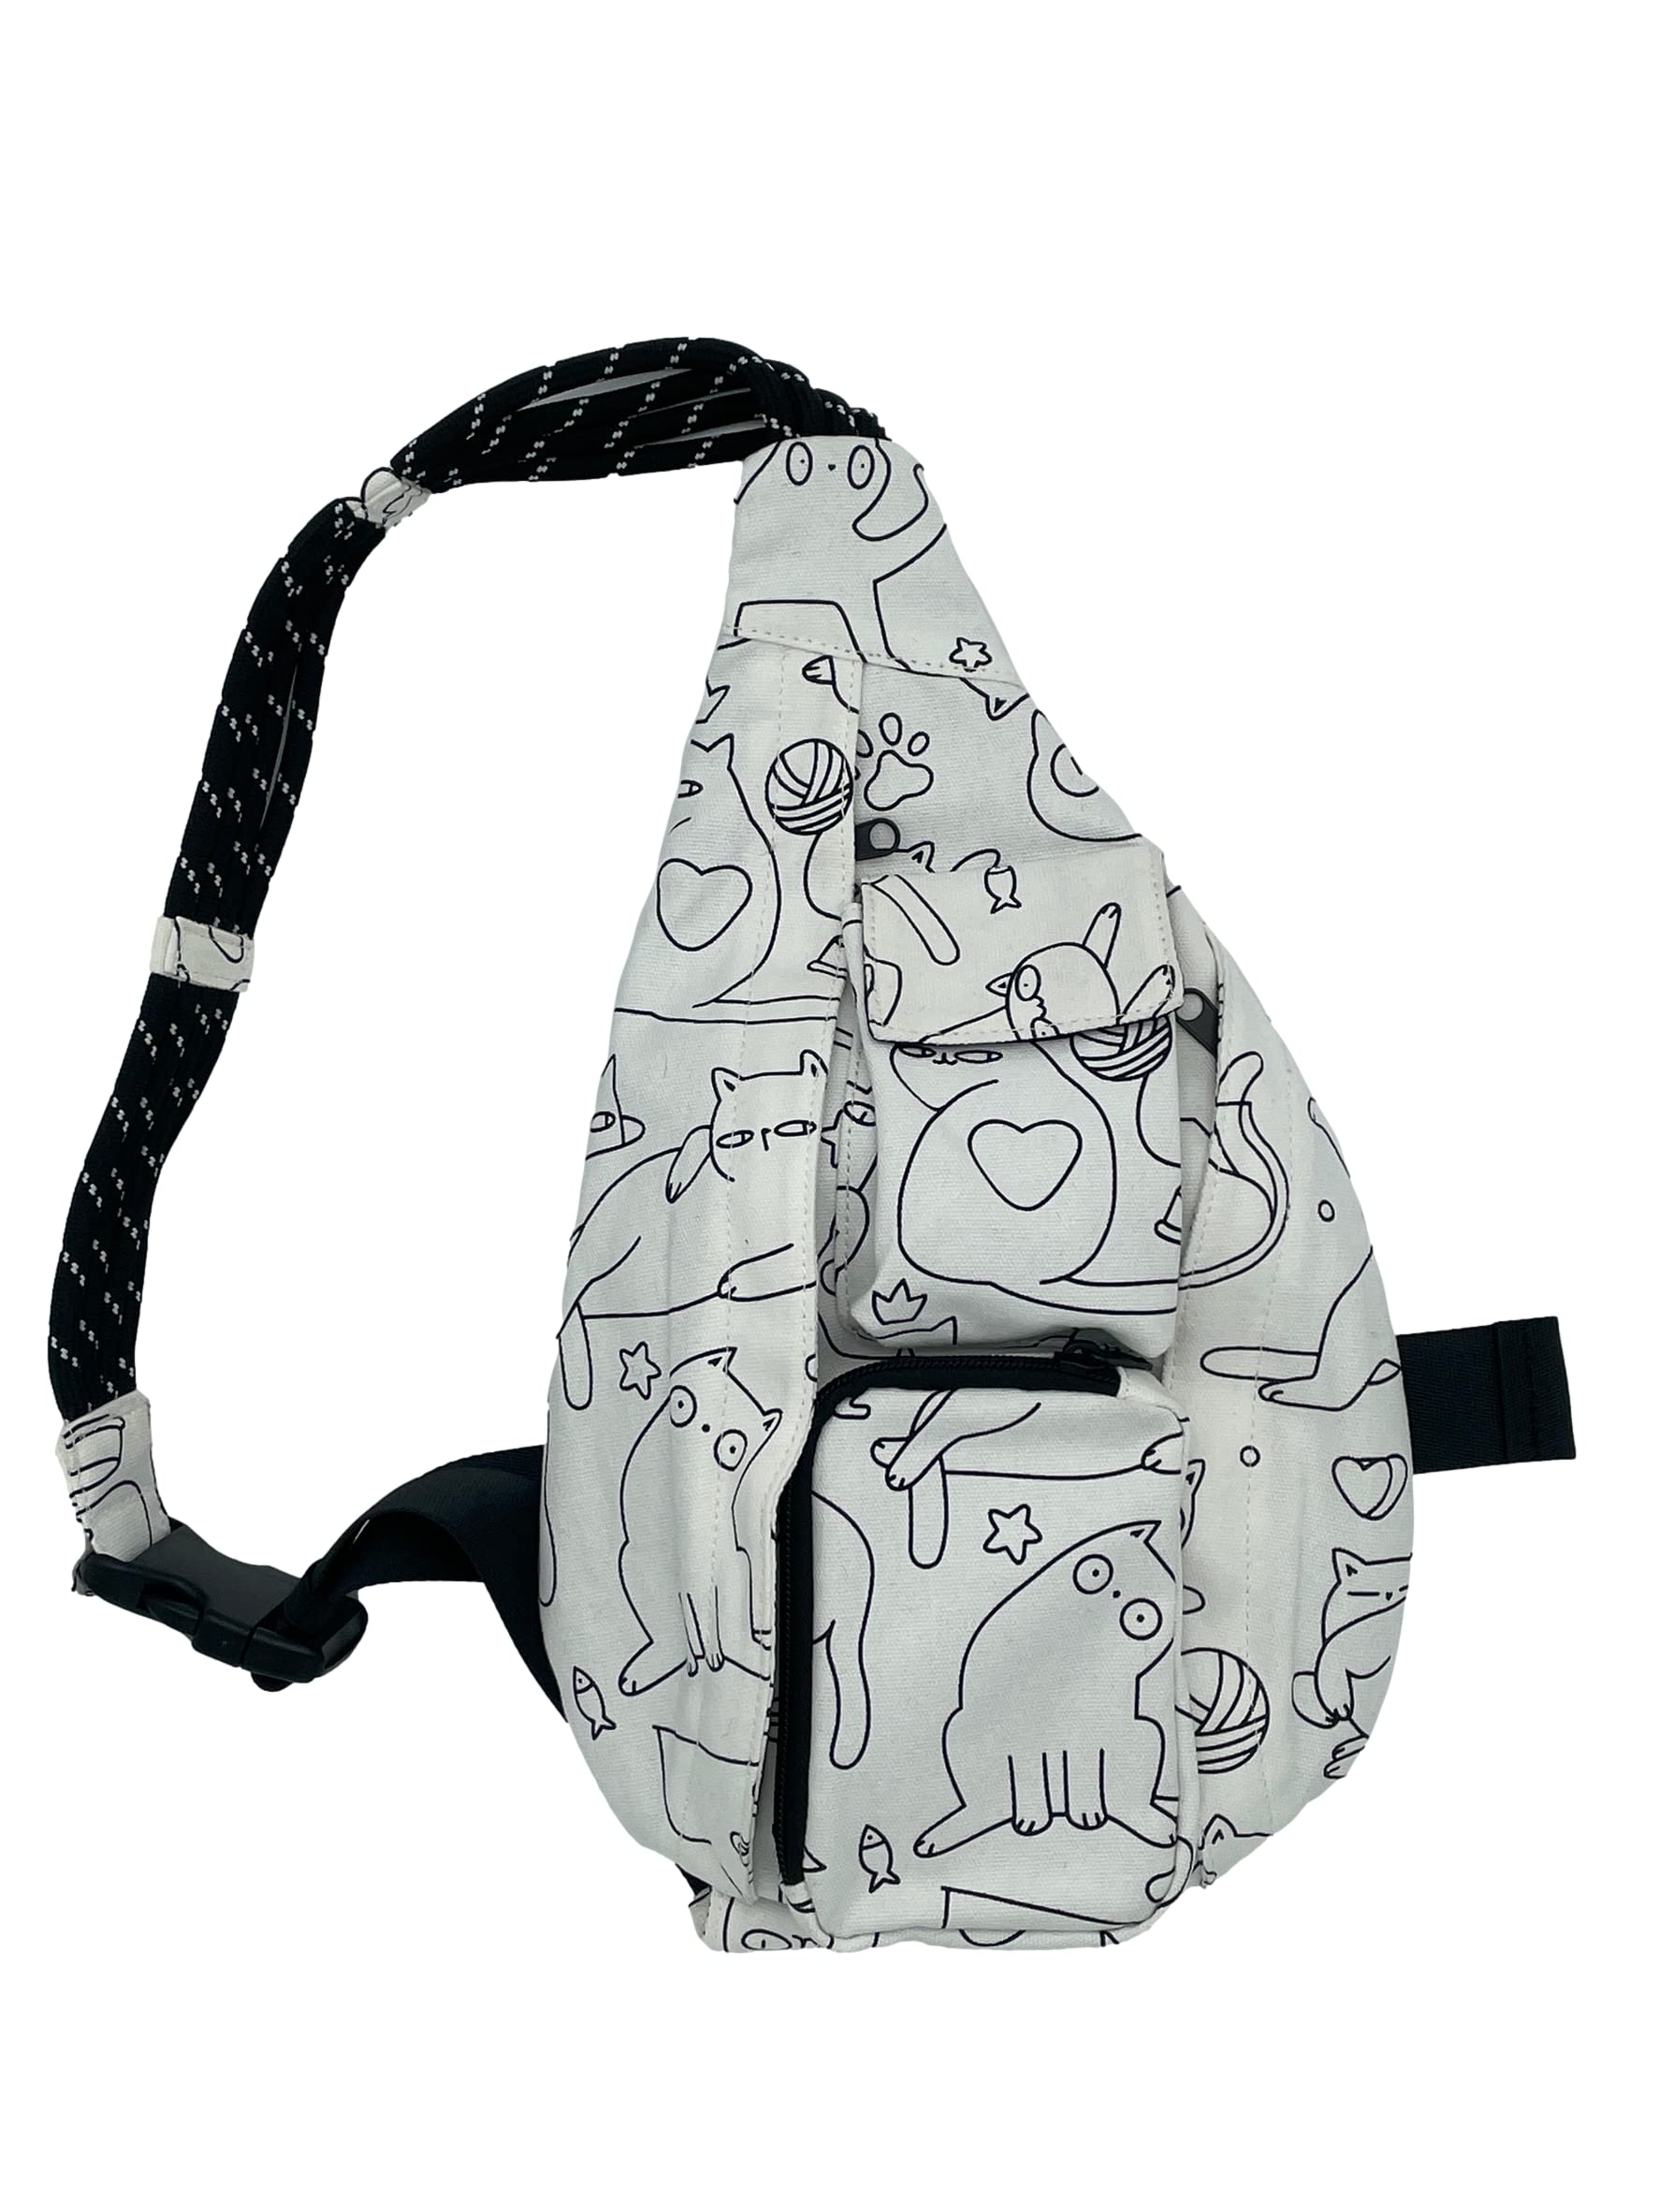 Color-It-Yourself Backpack, Personalize Creative Bag, Doodle Coin Purse, With Markers Set, Adorable Dogs or Whimsical Cats